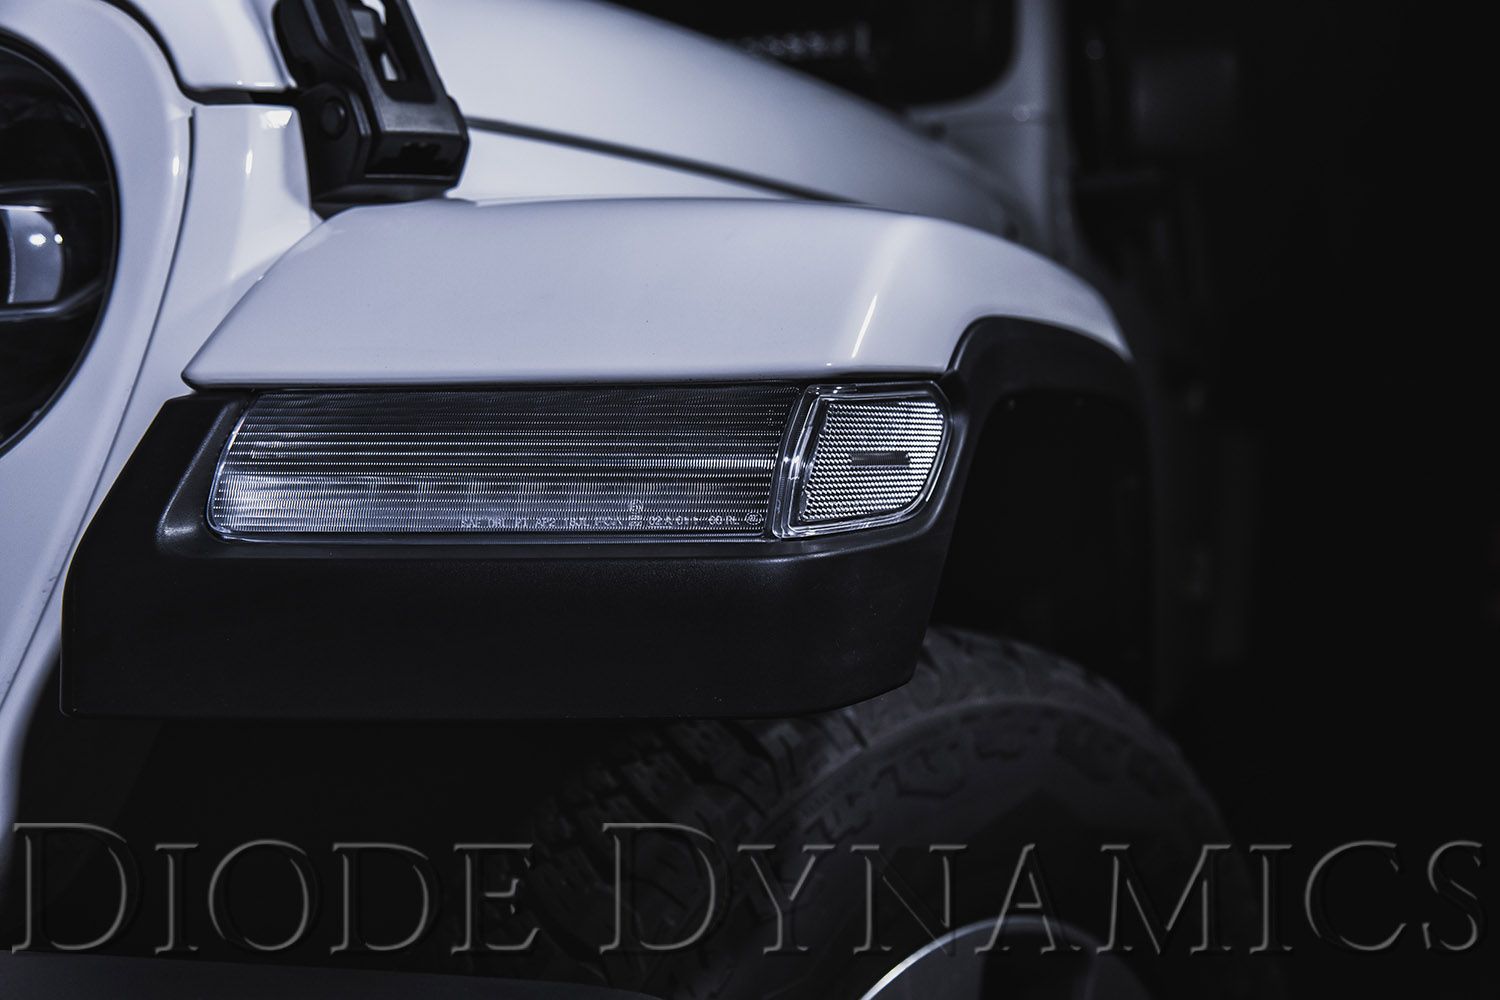 Diode Dynamics LED Sidemarkers for 2018-2021 Jeep JL Wrangler (pair)